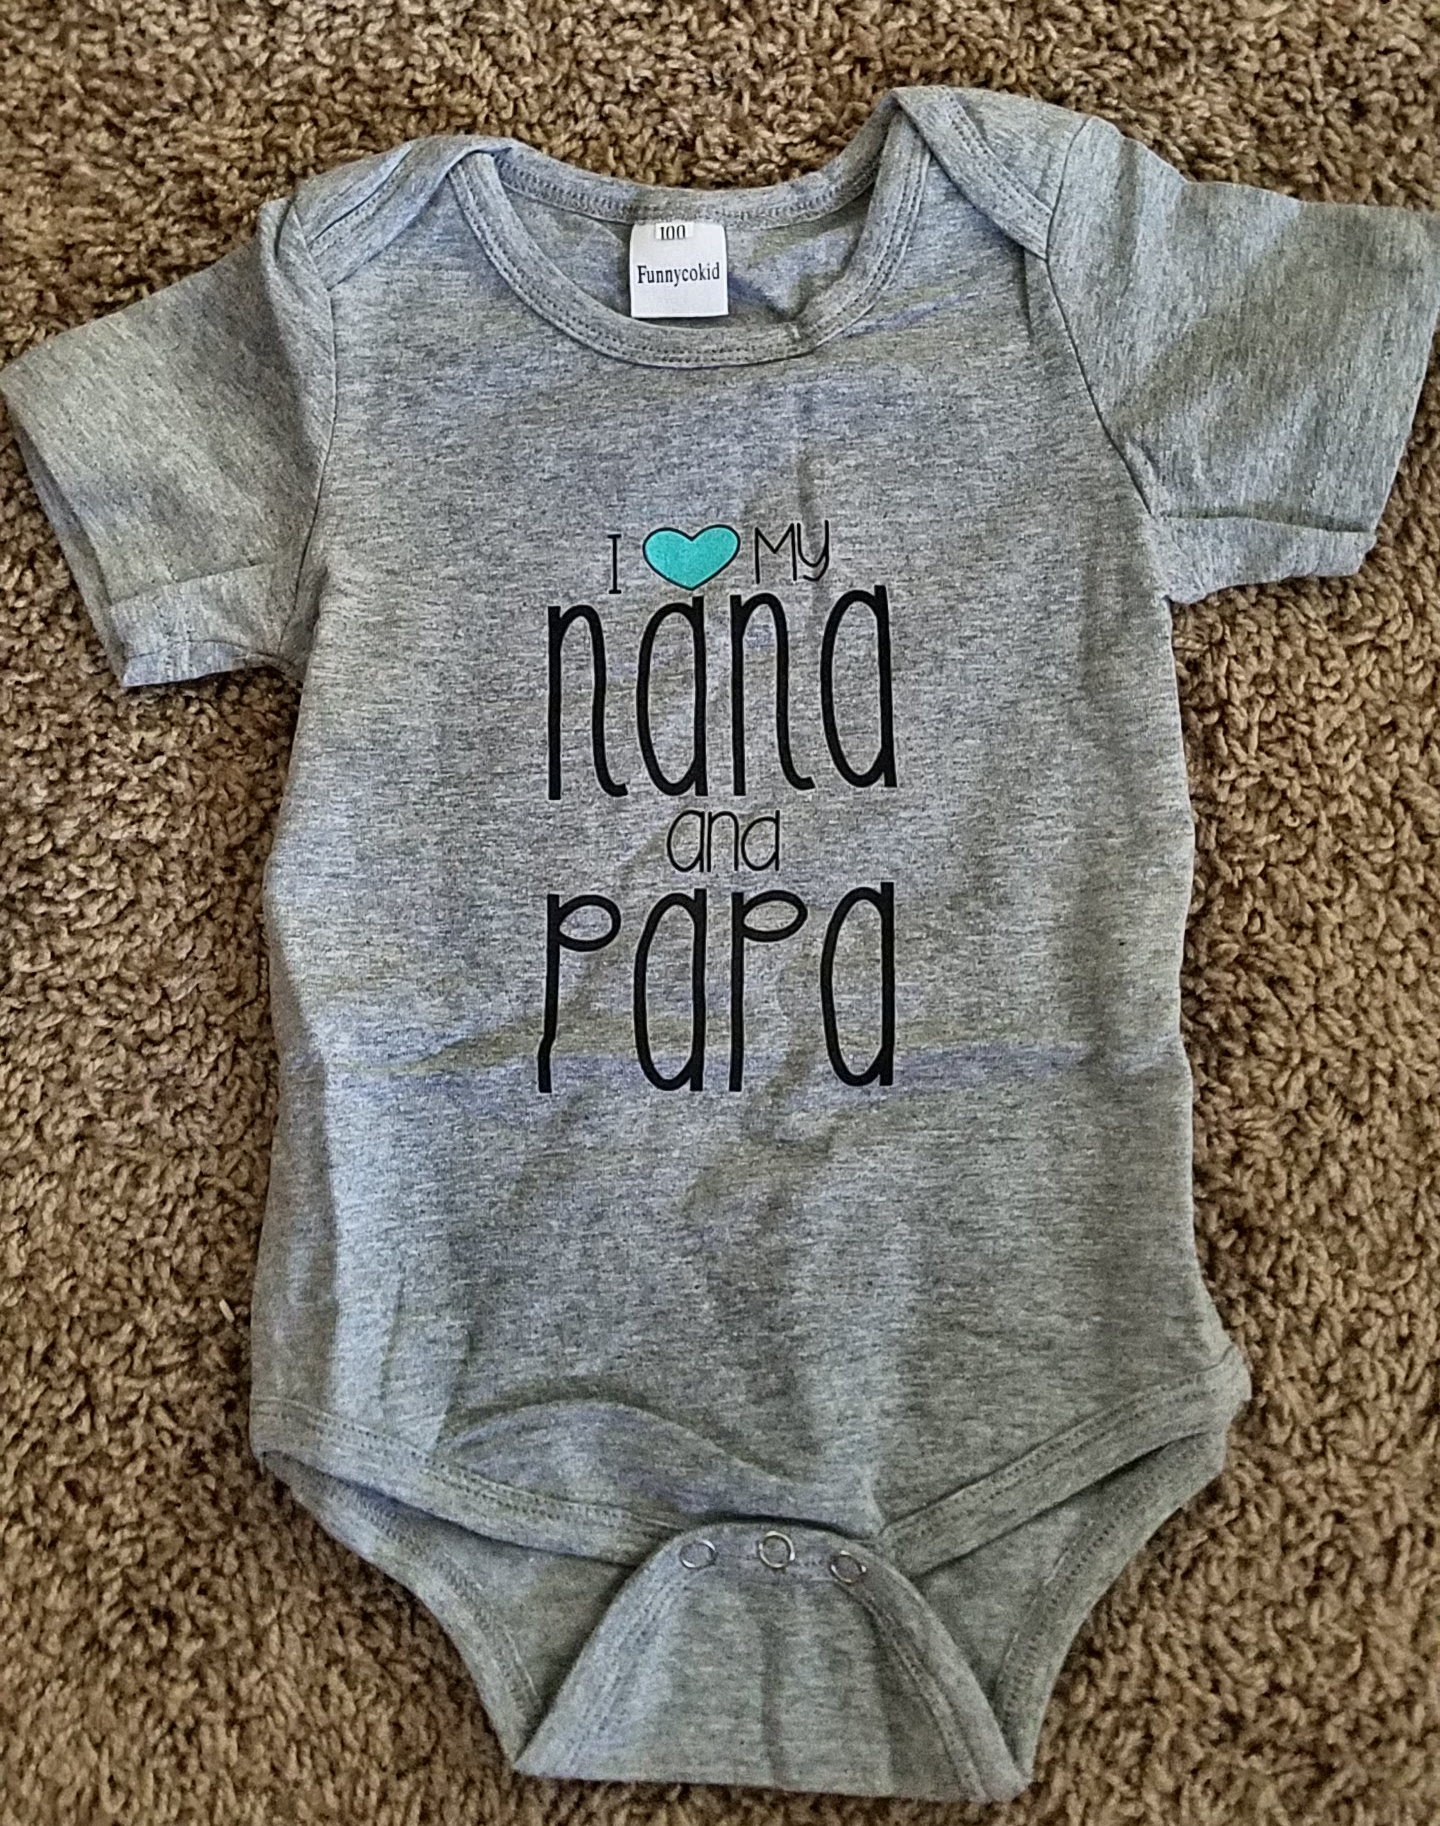 Great pajama for my little boy, and perfect fit...